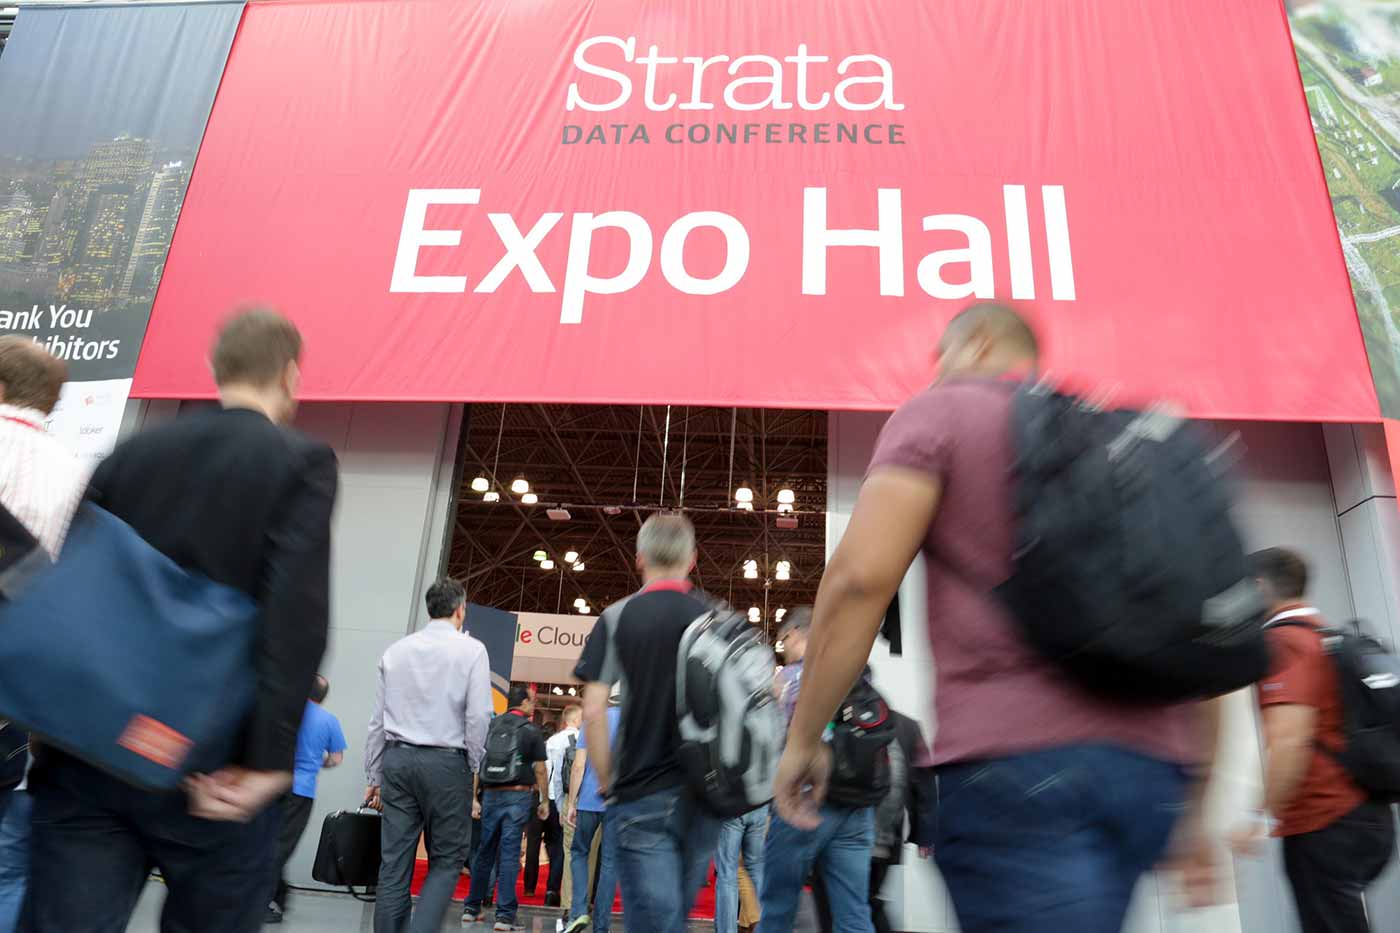 Strata Data Conference in New York